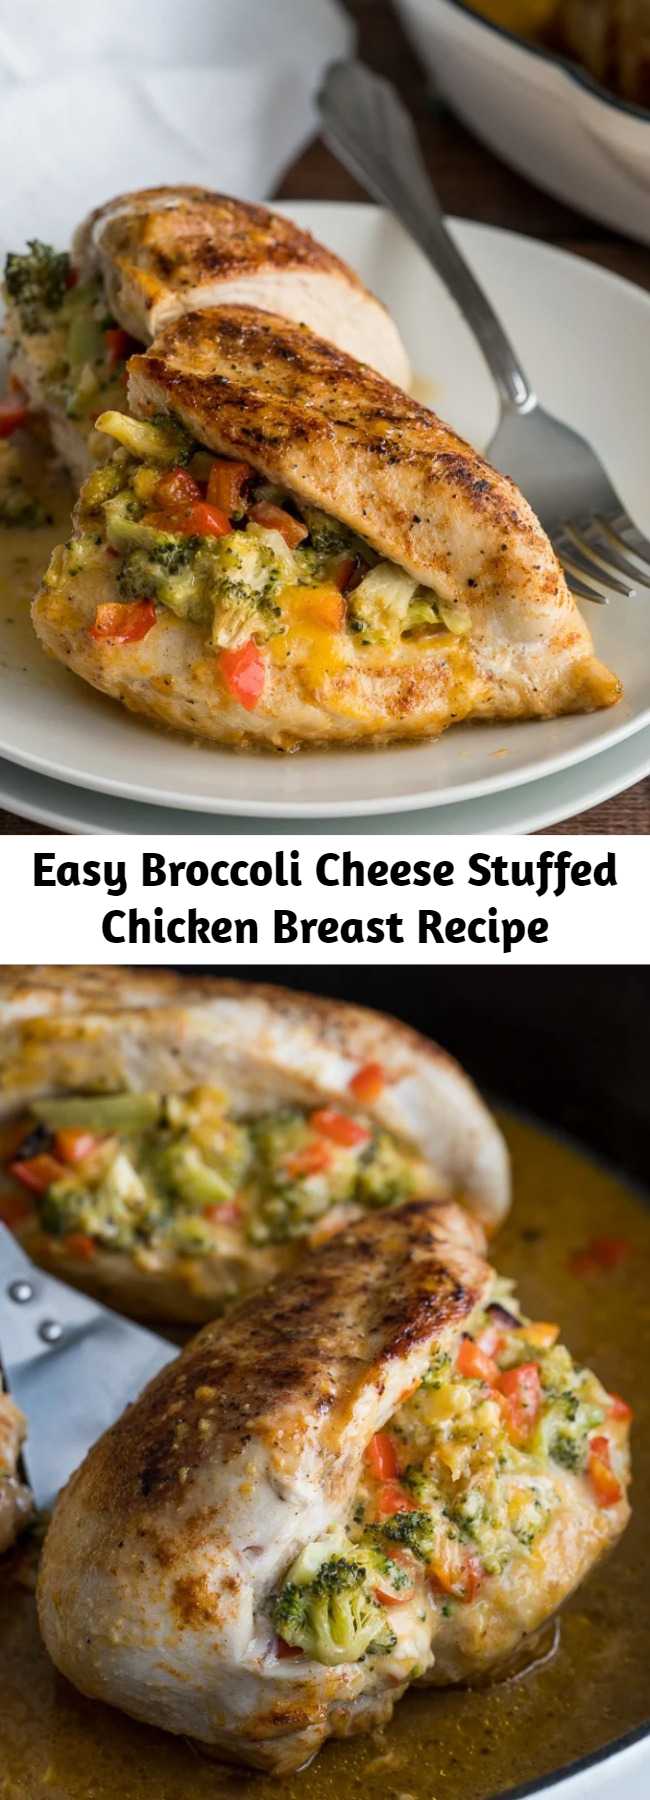 Easy Broccoli Cheese Stuffed Chicken Breast Recipe - This Broccoli Cheese Stuffed Chicken Breast is filled with a simple broccoli cheese mixture, seared in a skillet, then baked to perfection.